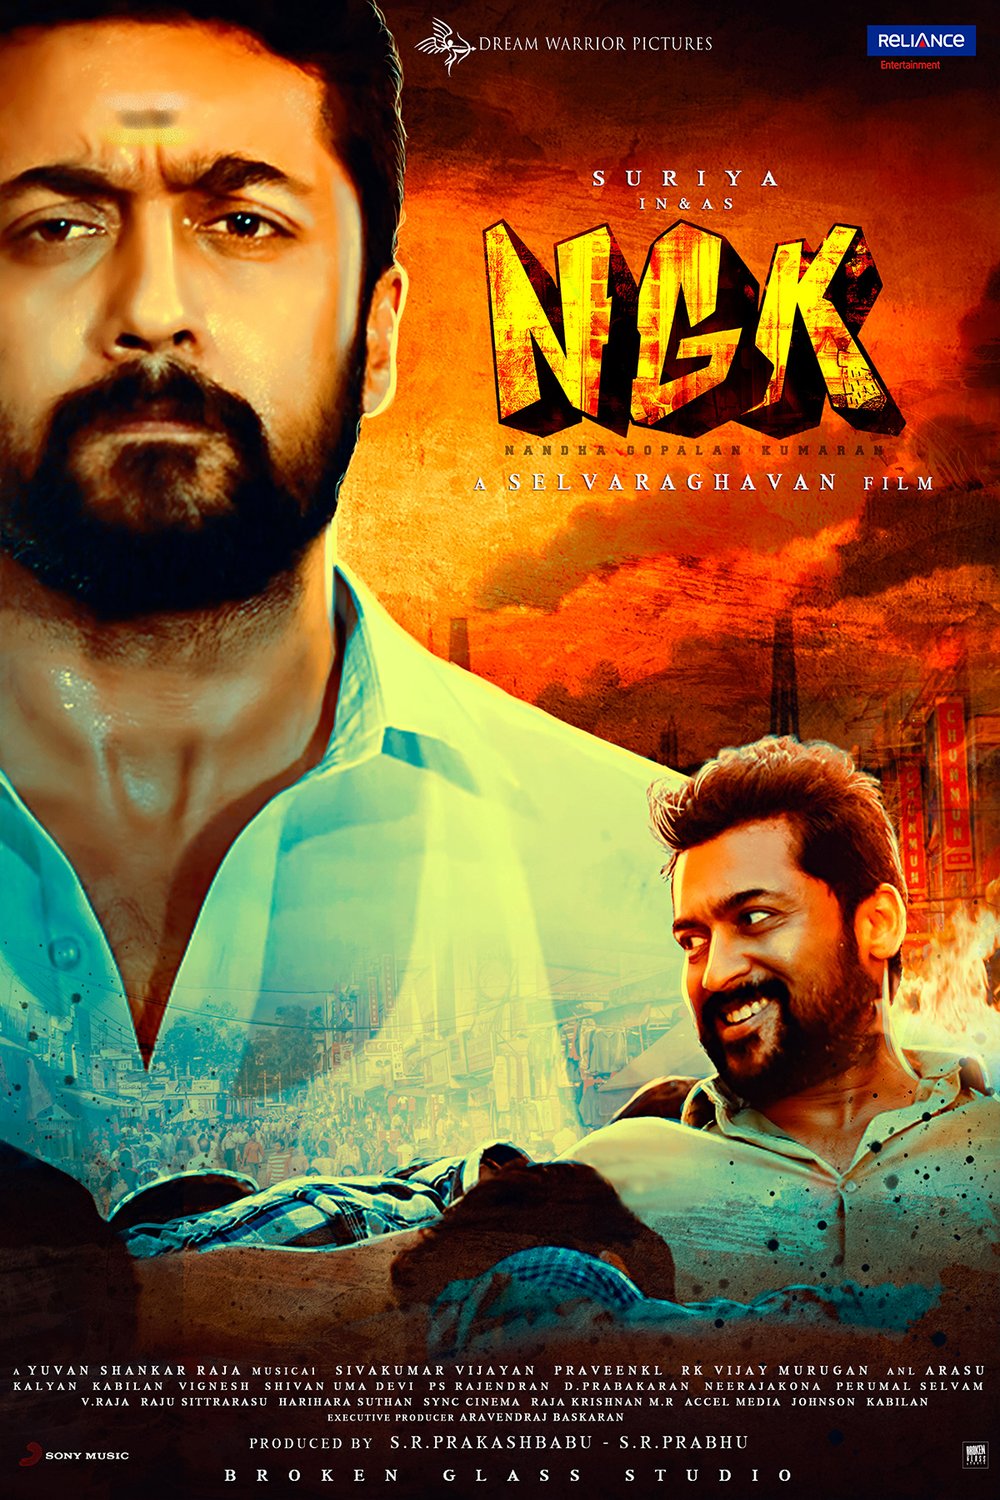 Tamil poster of the movie NGK